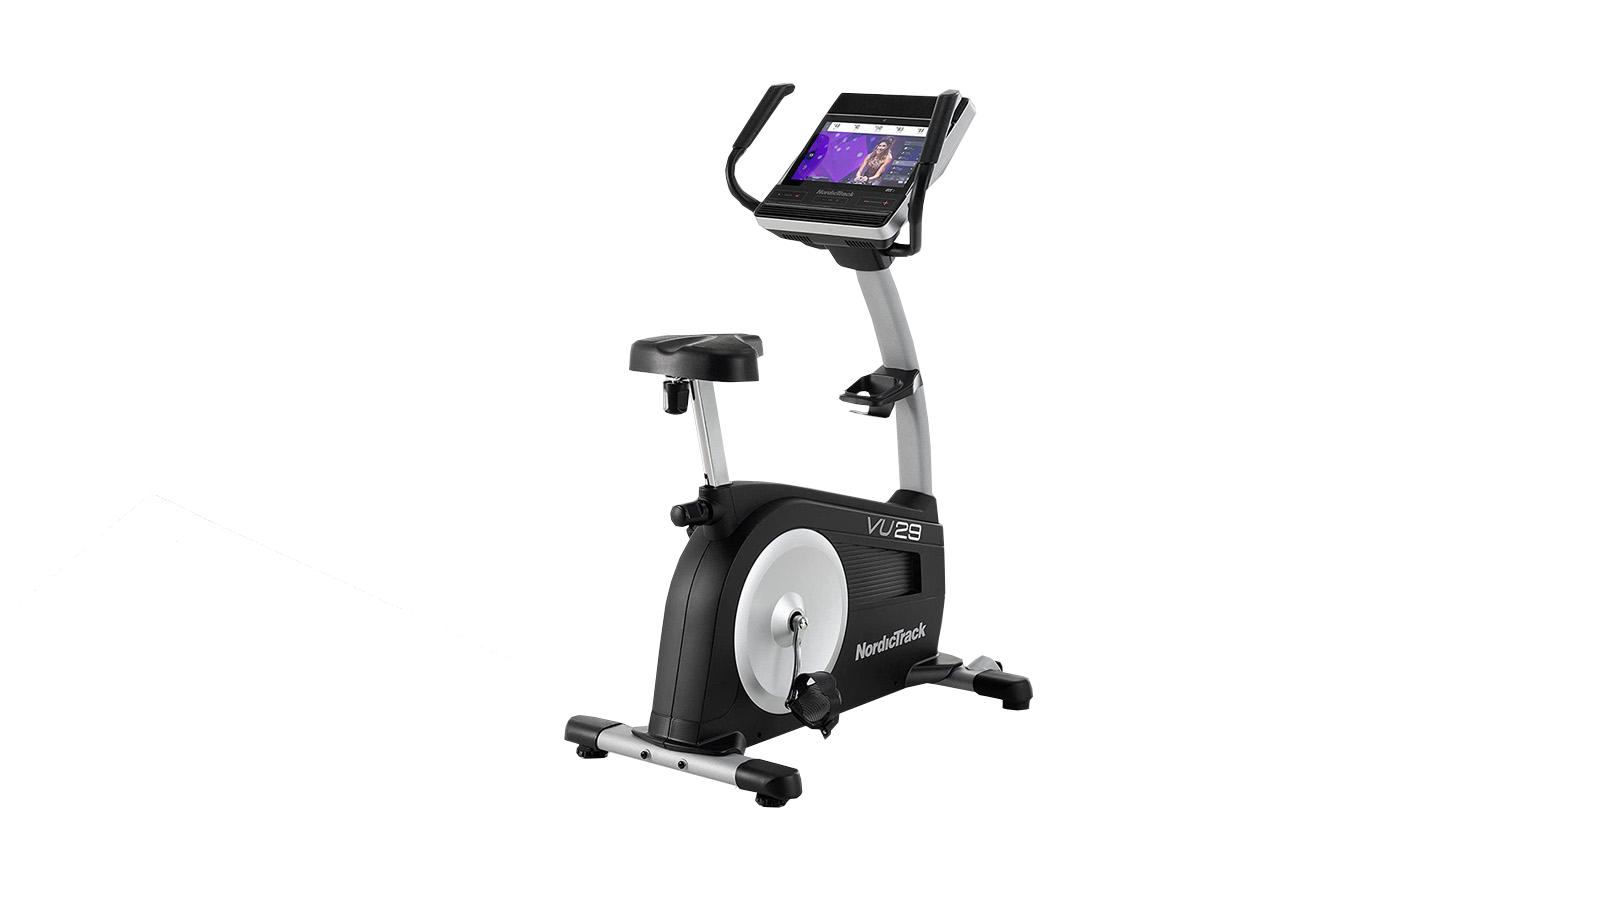 NordicTrack-VU-29-Exercise-Bike-Feature-Image